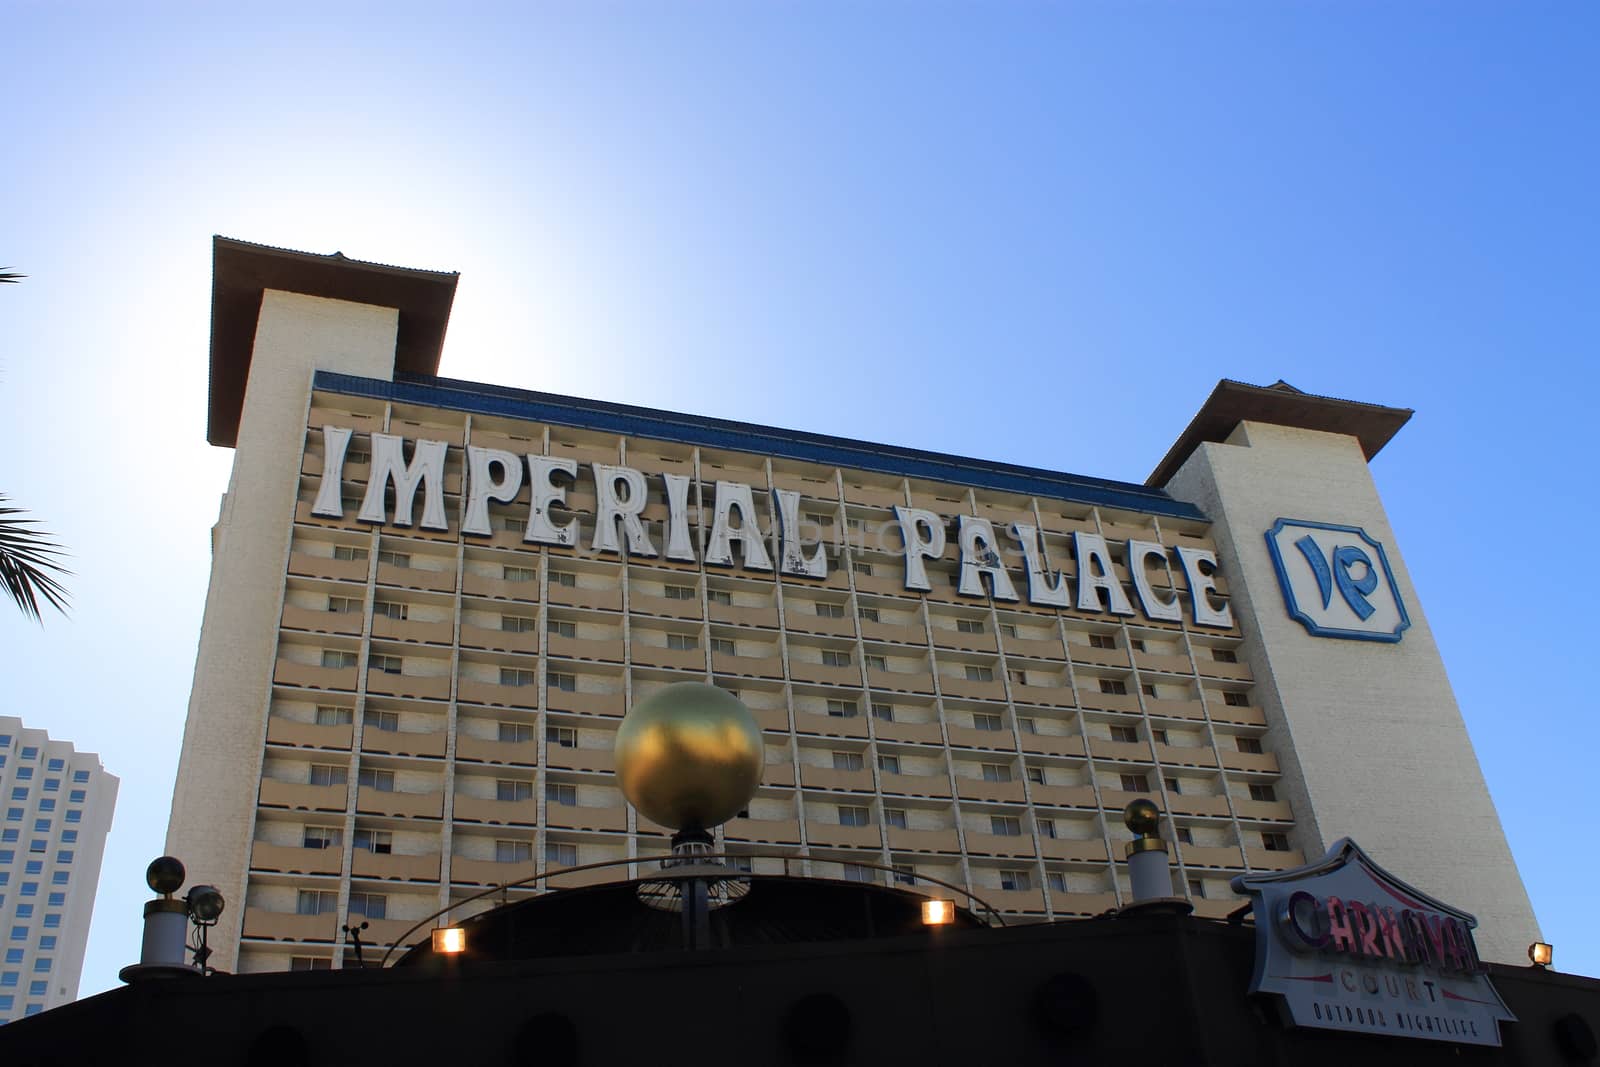 Imperial Palace Hotel and Casino - Las Vegas by Ffooter